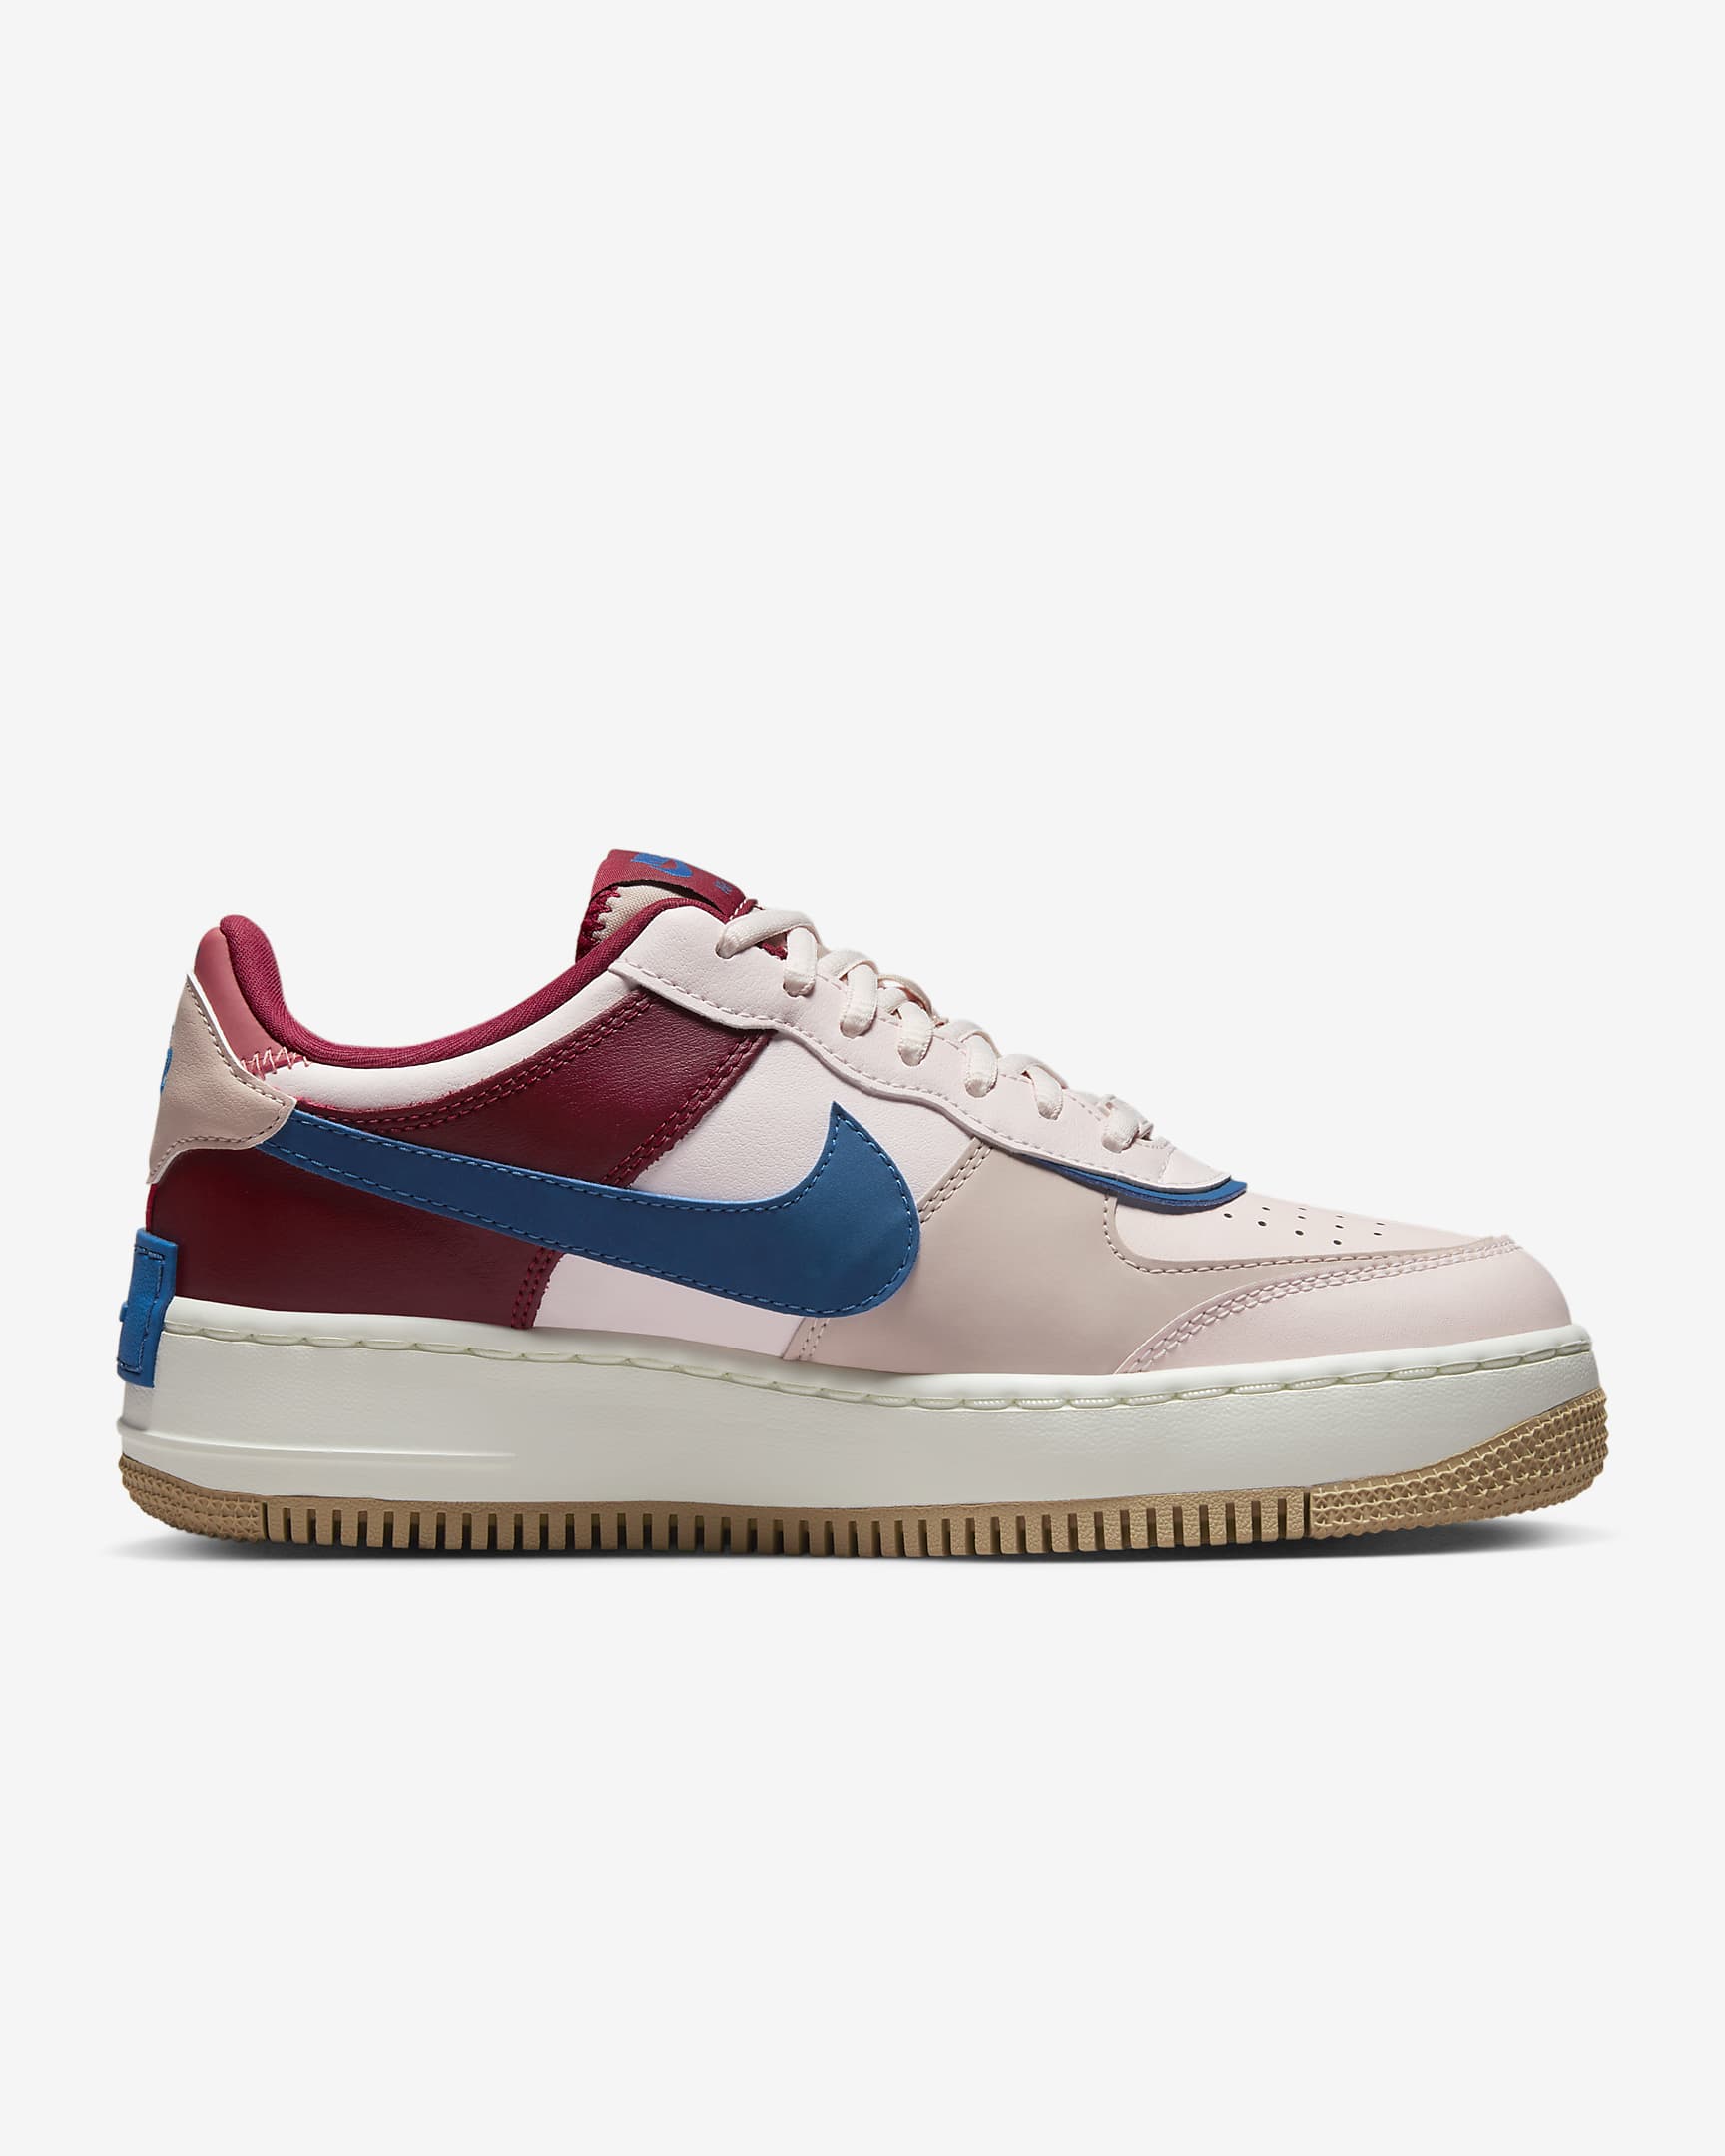 Nike Air Force 1 Shadow Women's Shoes - Light Soft Pink/Fossil Stone/Team Red/Canyon Rust